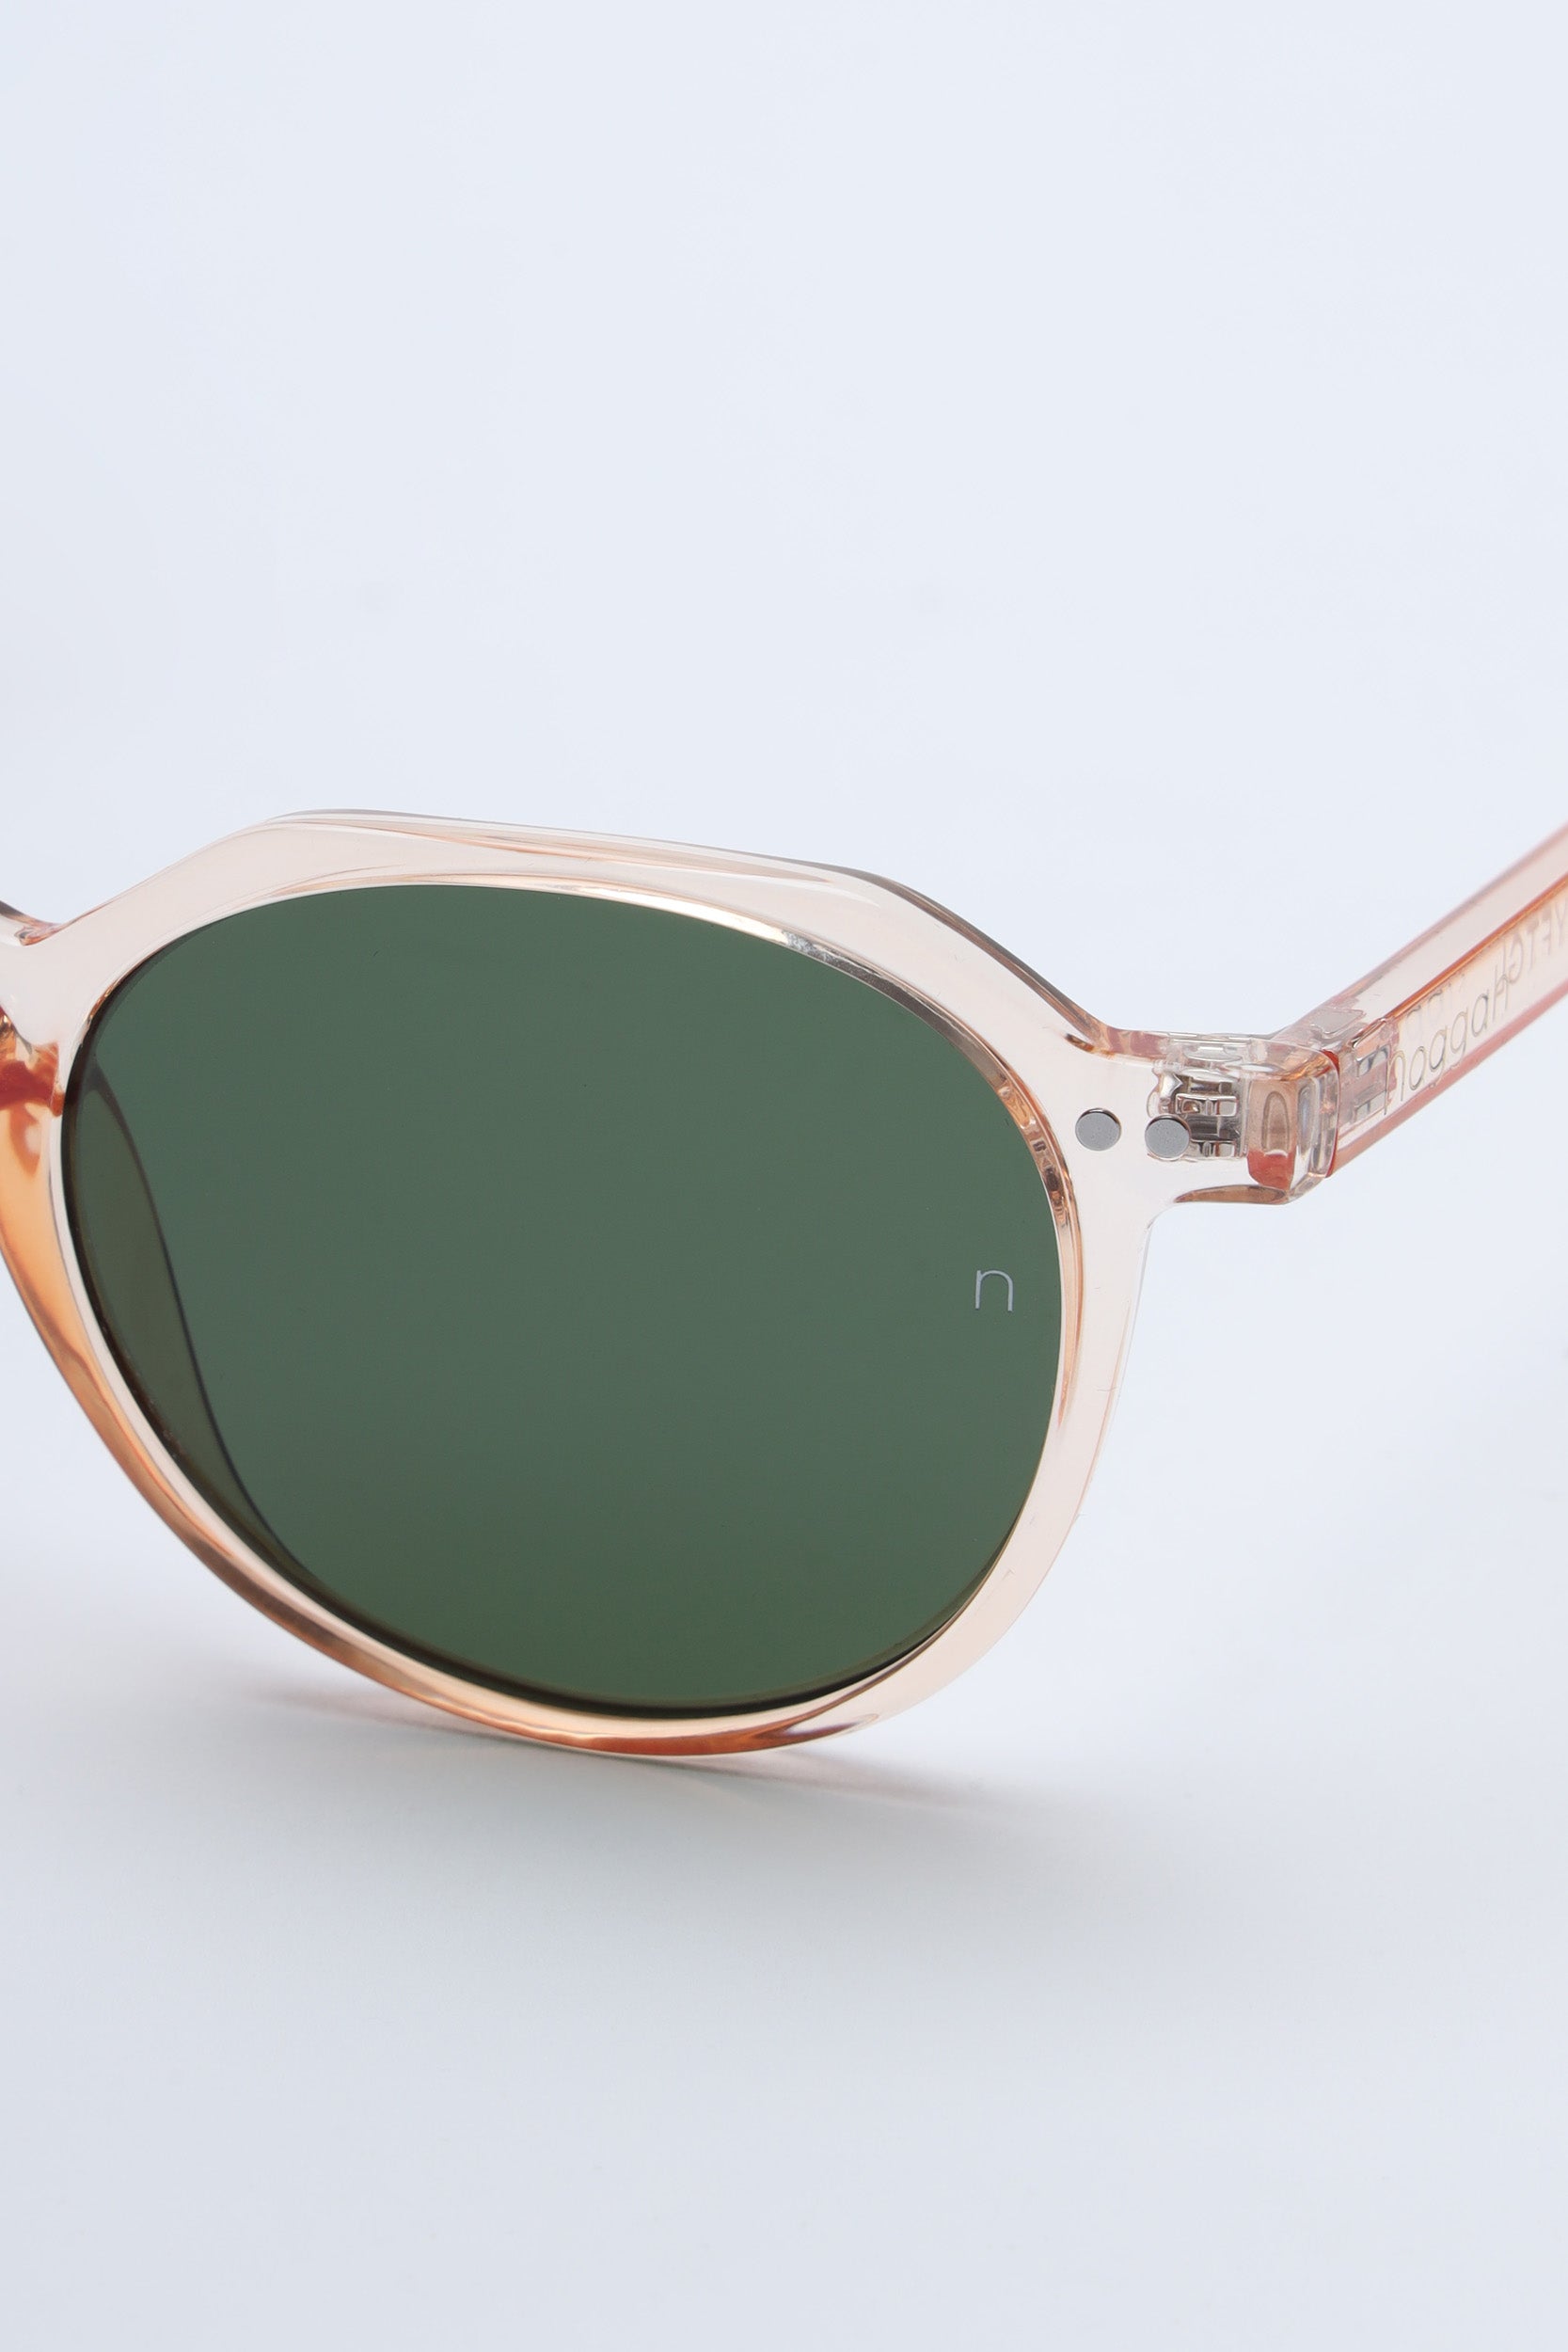 NS1009YFGL PC Brown Frame with Green Glass Lens Sunglasses